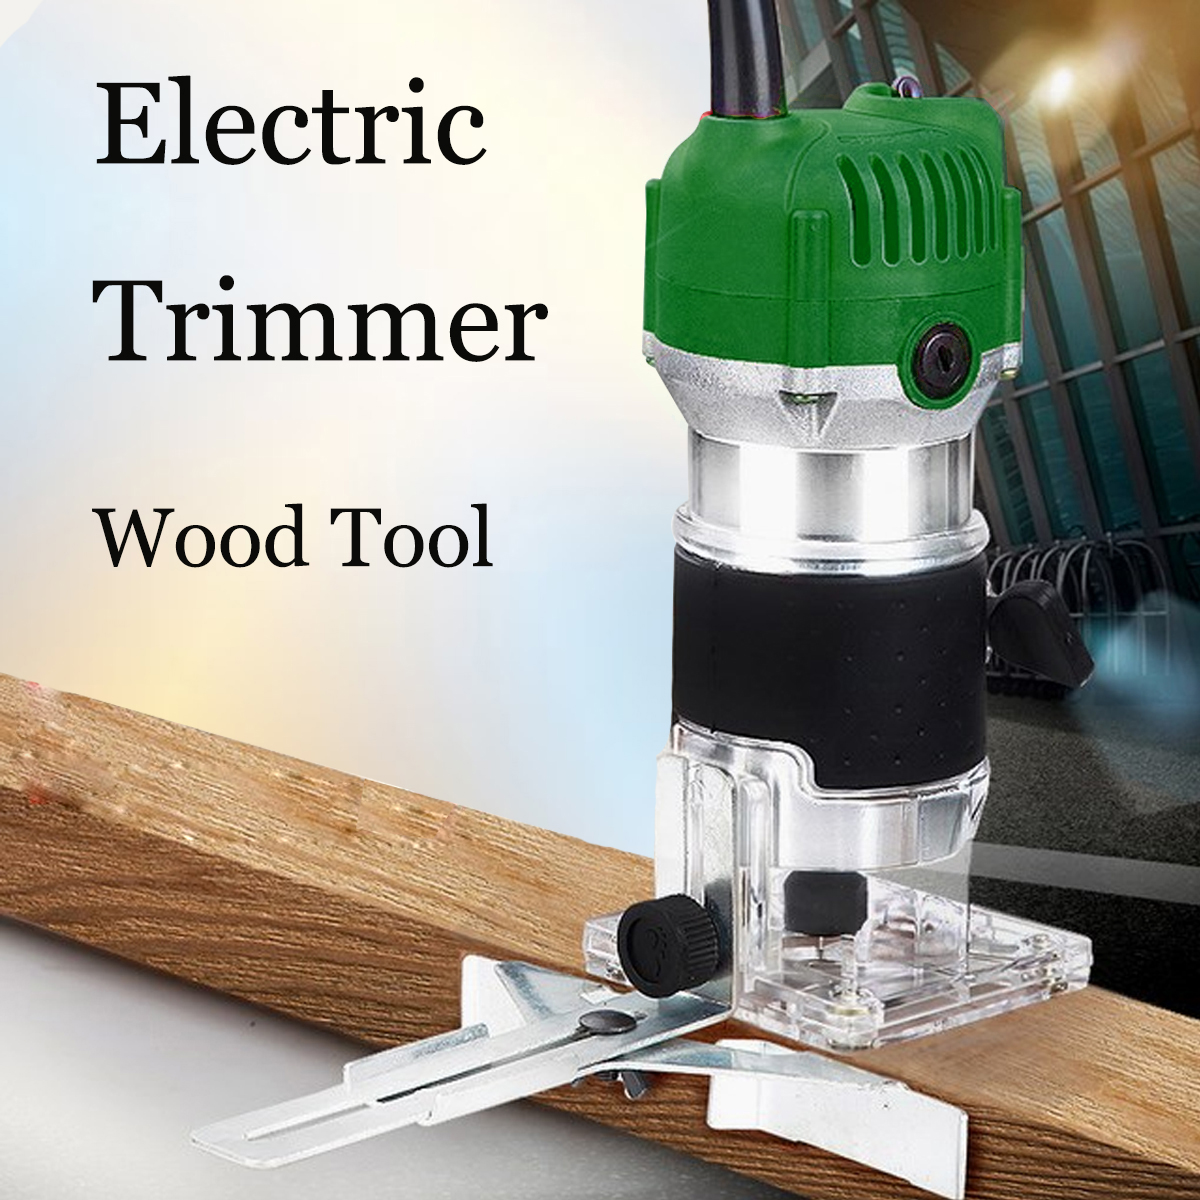 30000RPM-600W-Electric-Hand-Trimmer-Wood-Laminate-Palm-Router-Joiners-Tool-Wood-Trimming-Machine-1821640-2